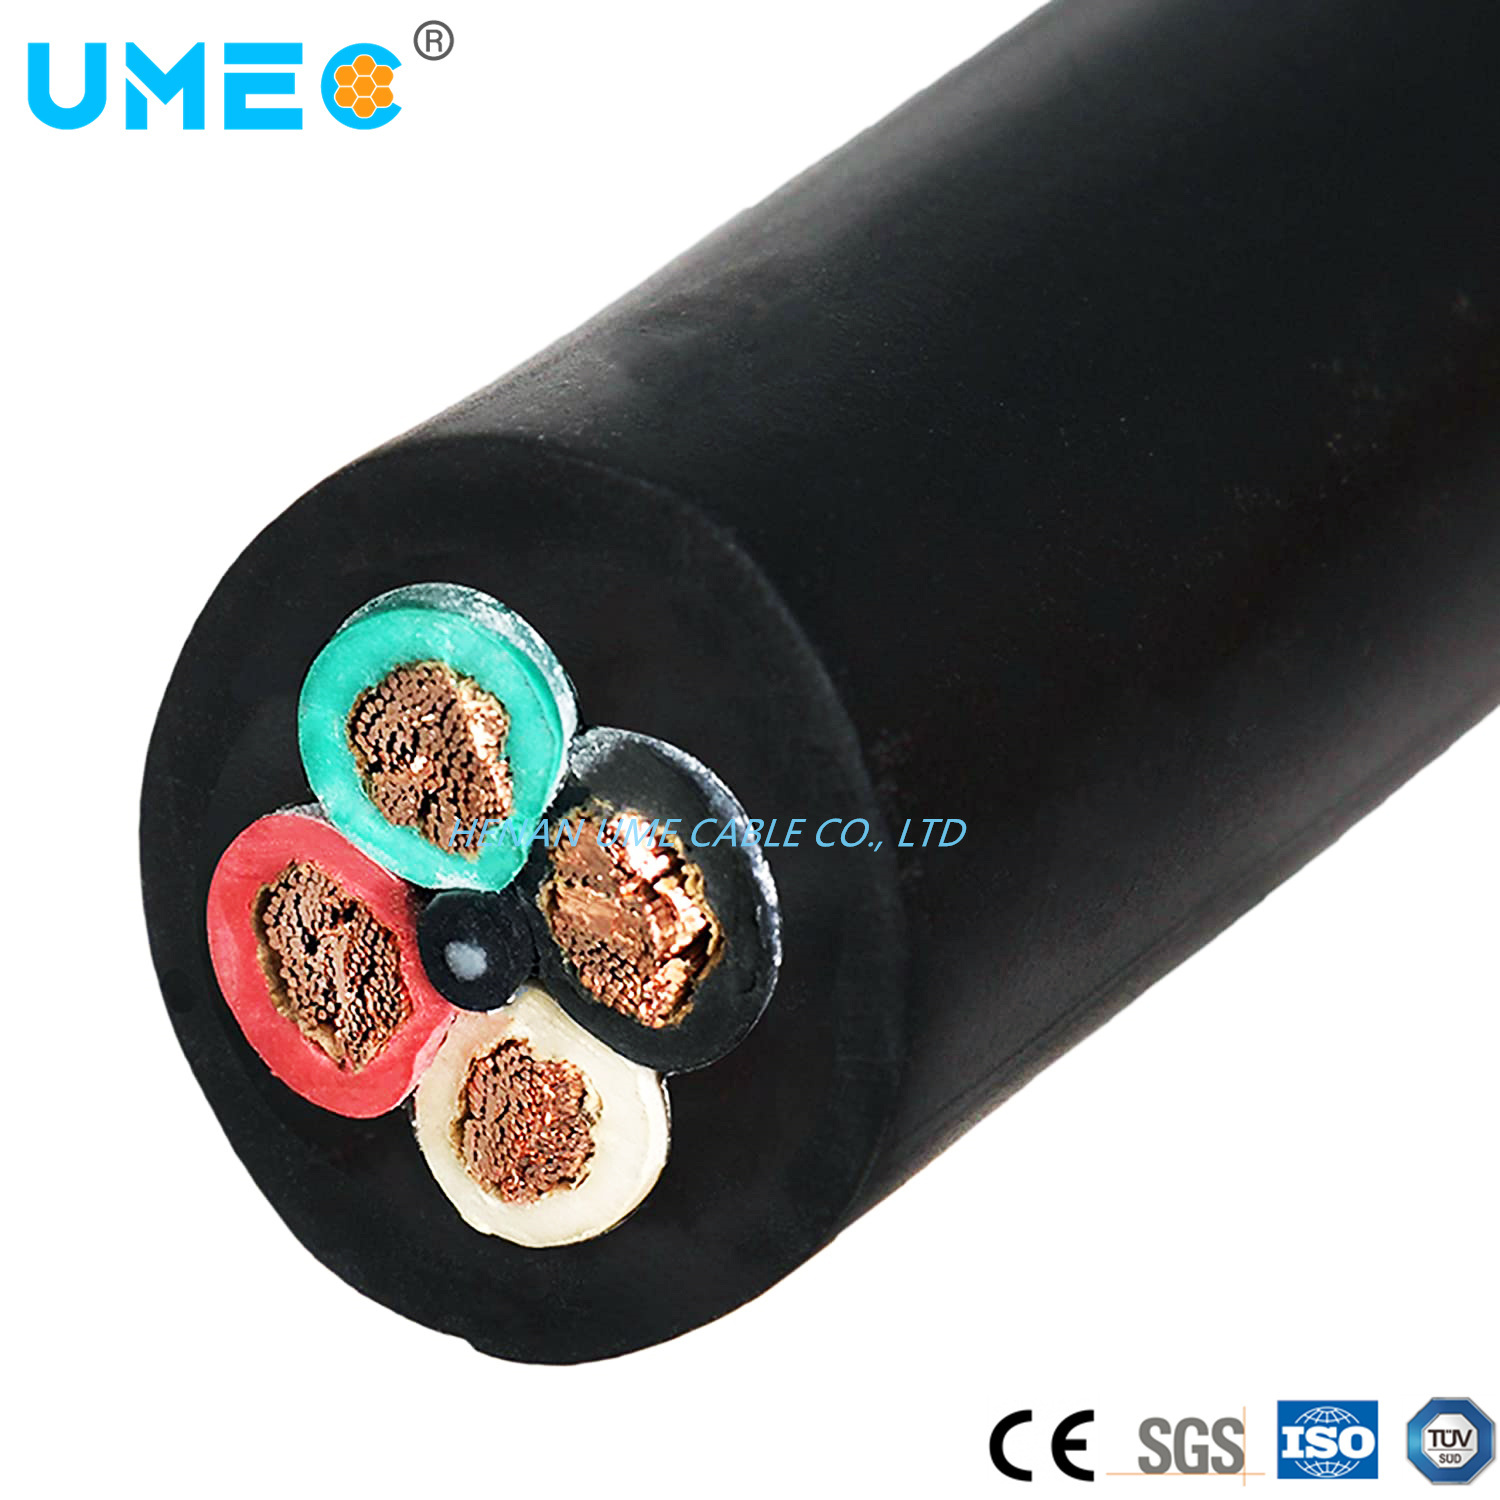 Nyy-J and Nyy-O Power Cable 0.6/1 Kv VDE Approved